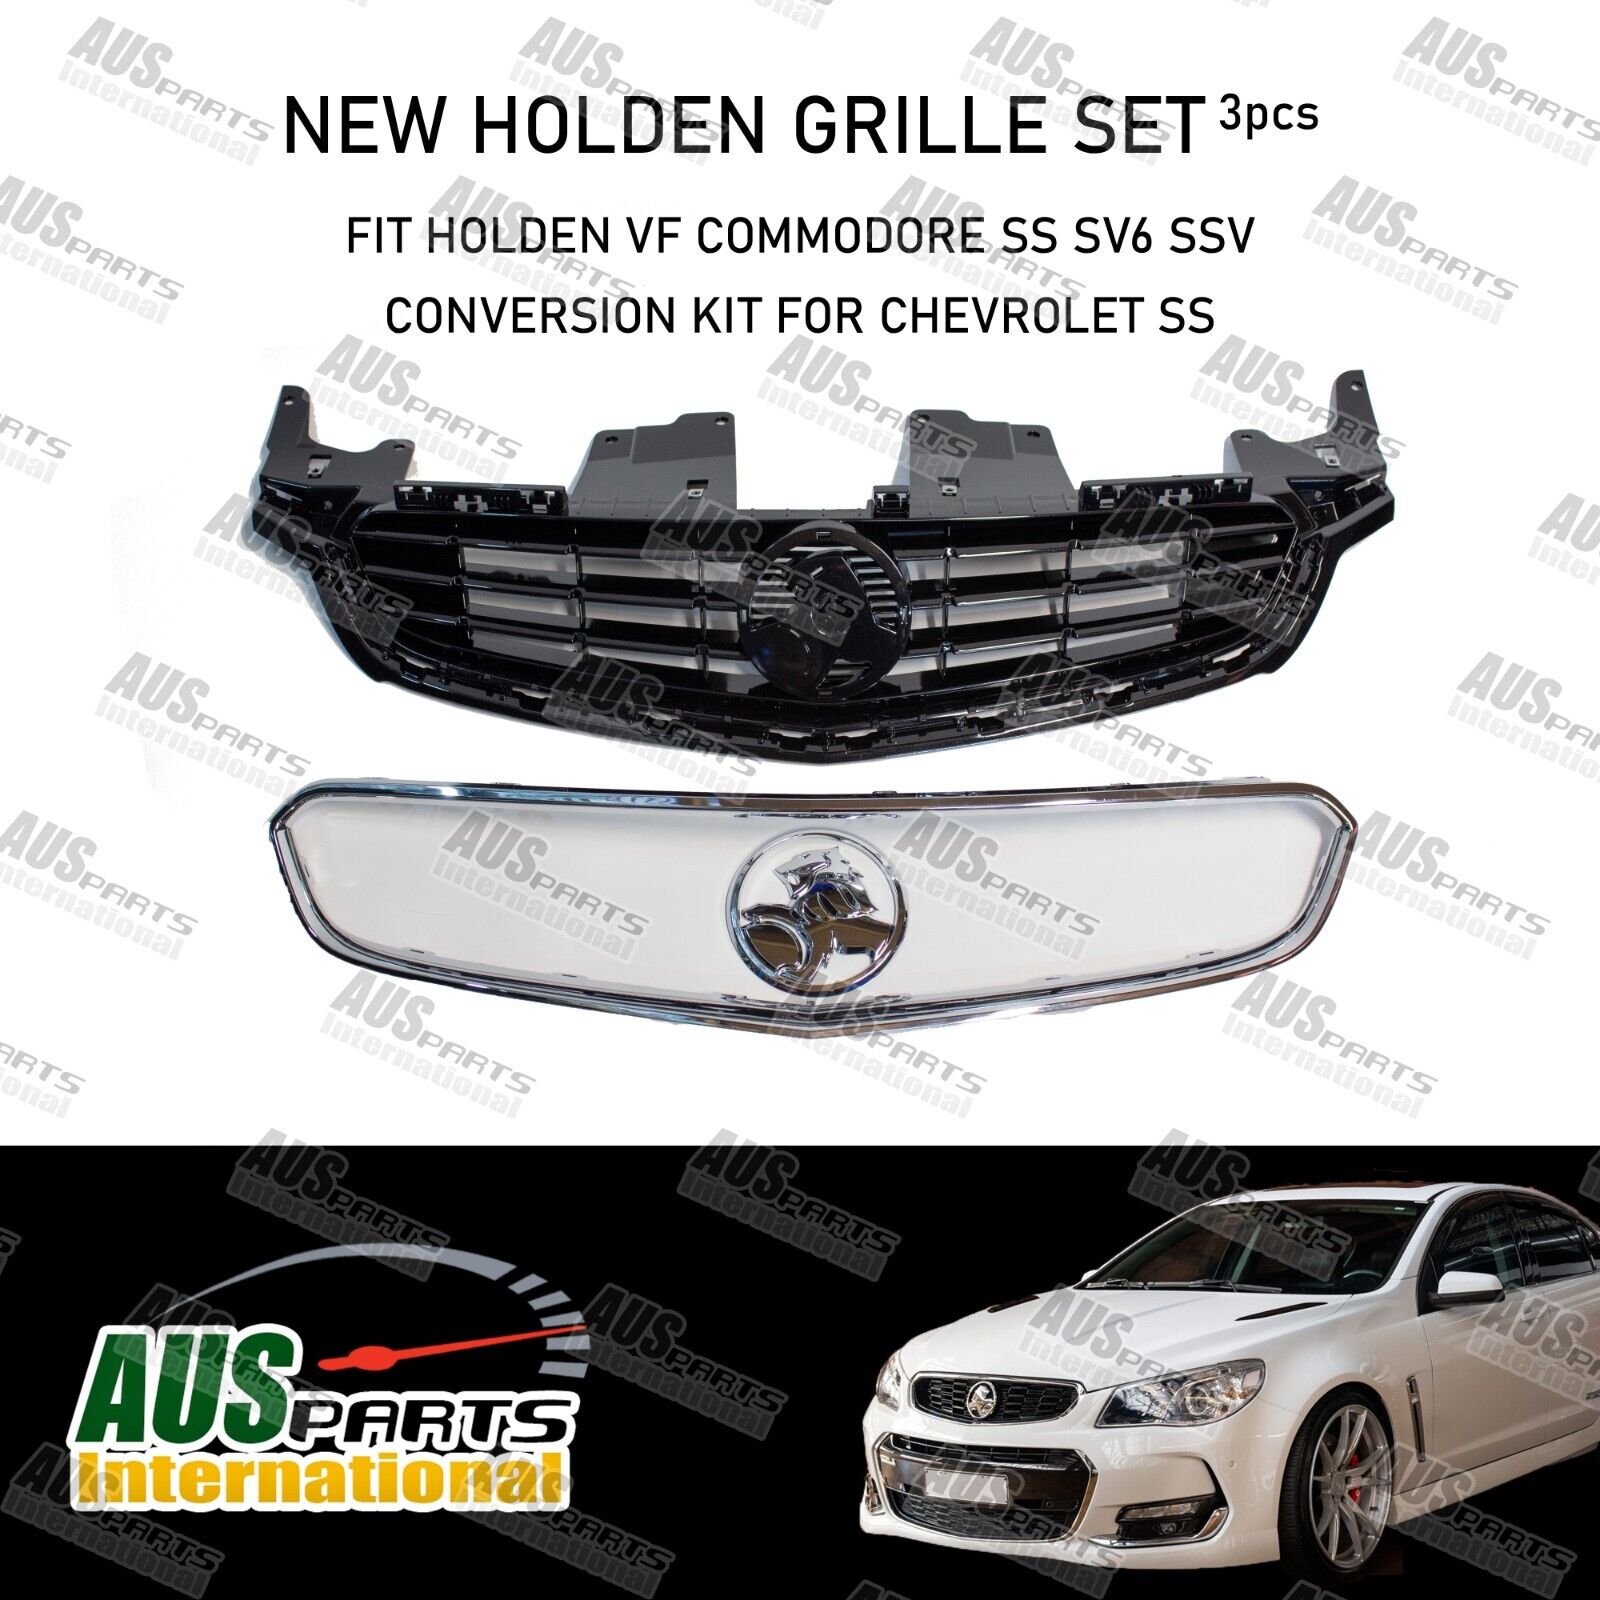 NEW HOLDEN grille conversion set for Chevrolet Chevy SS 2013-2015 & VF Commodore